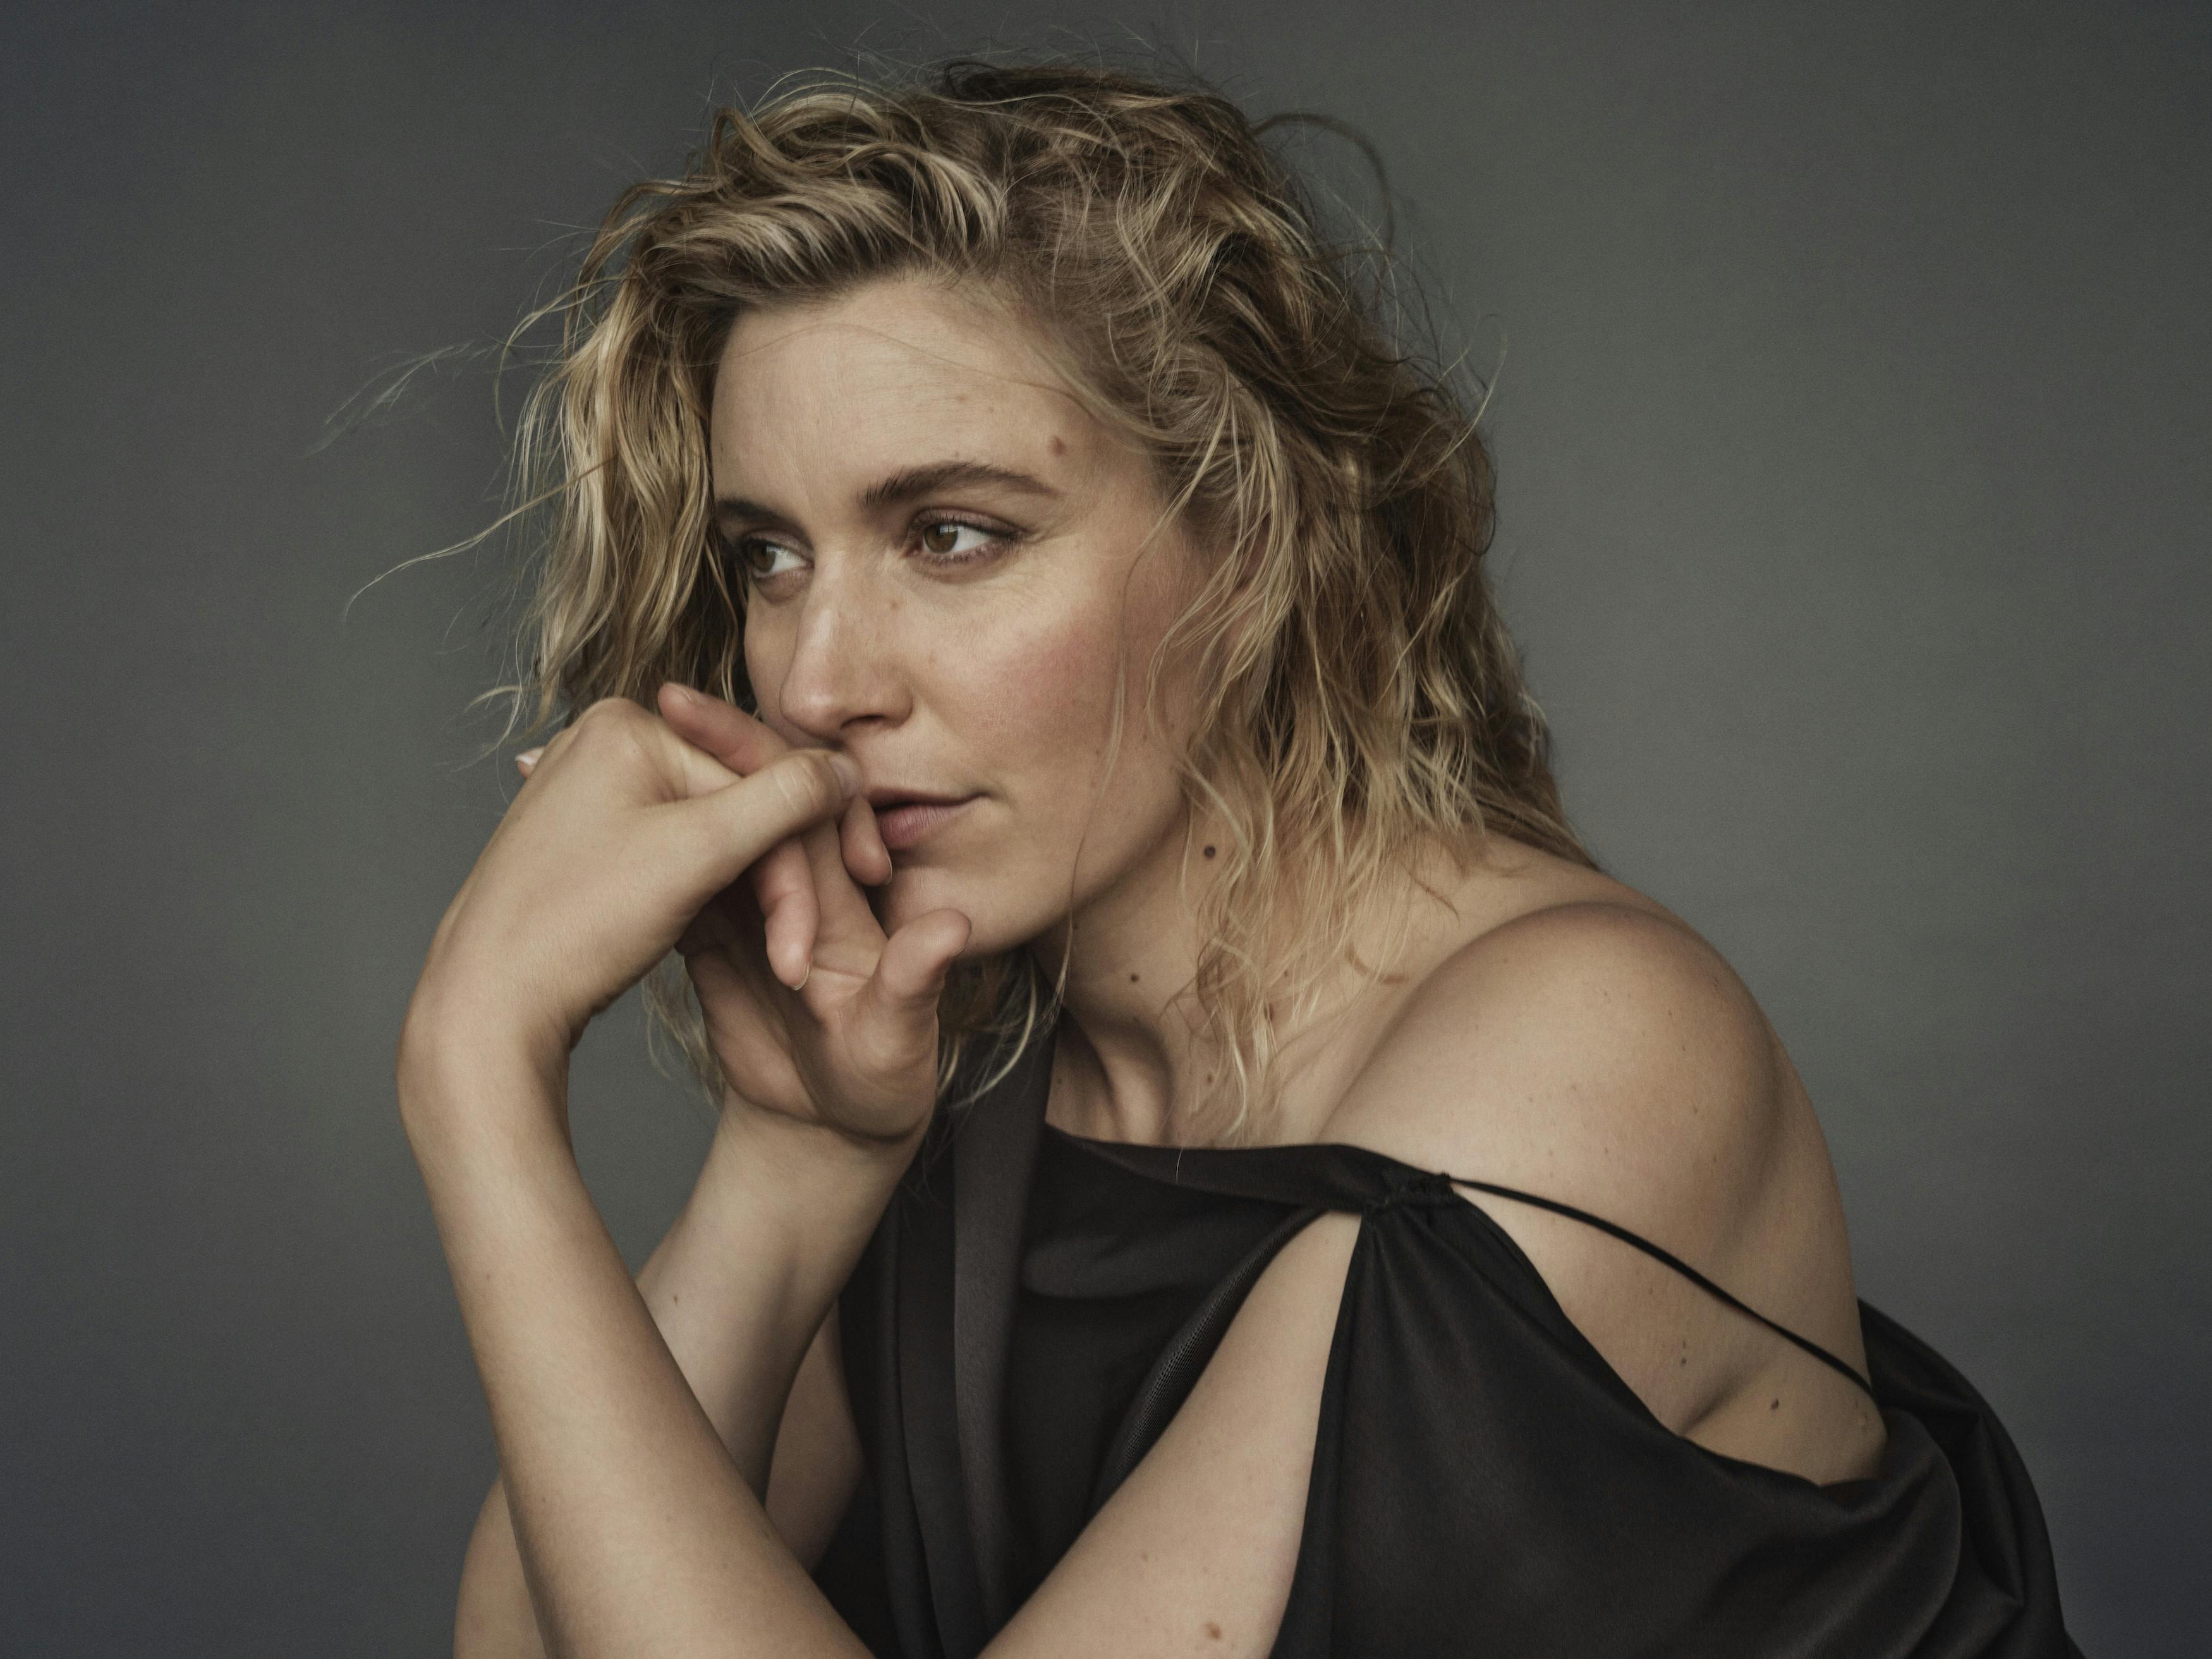 Greta Gerwig wears a black strapless top and rests her chin on her folded hands.